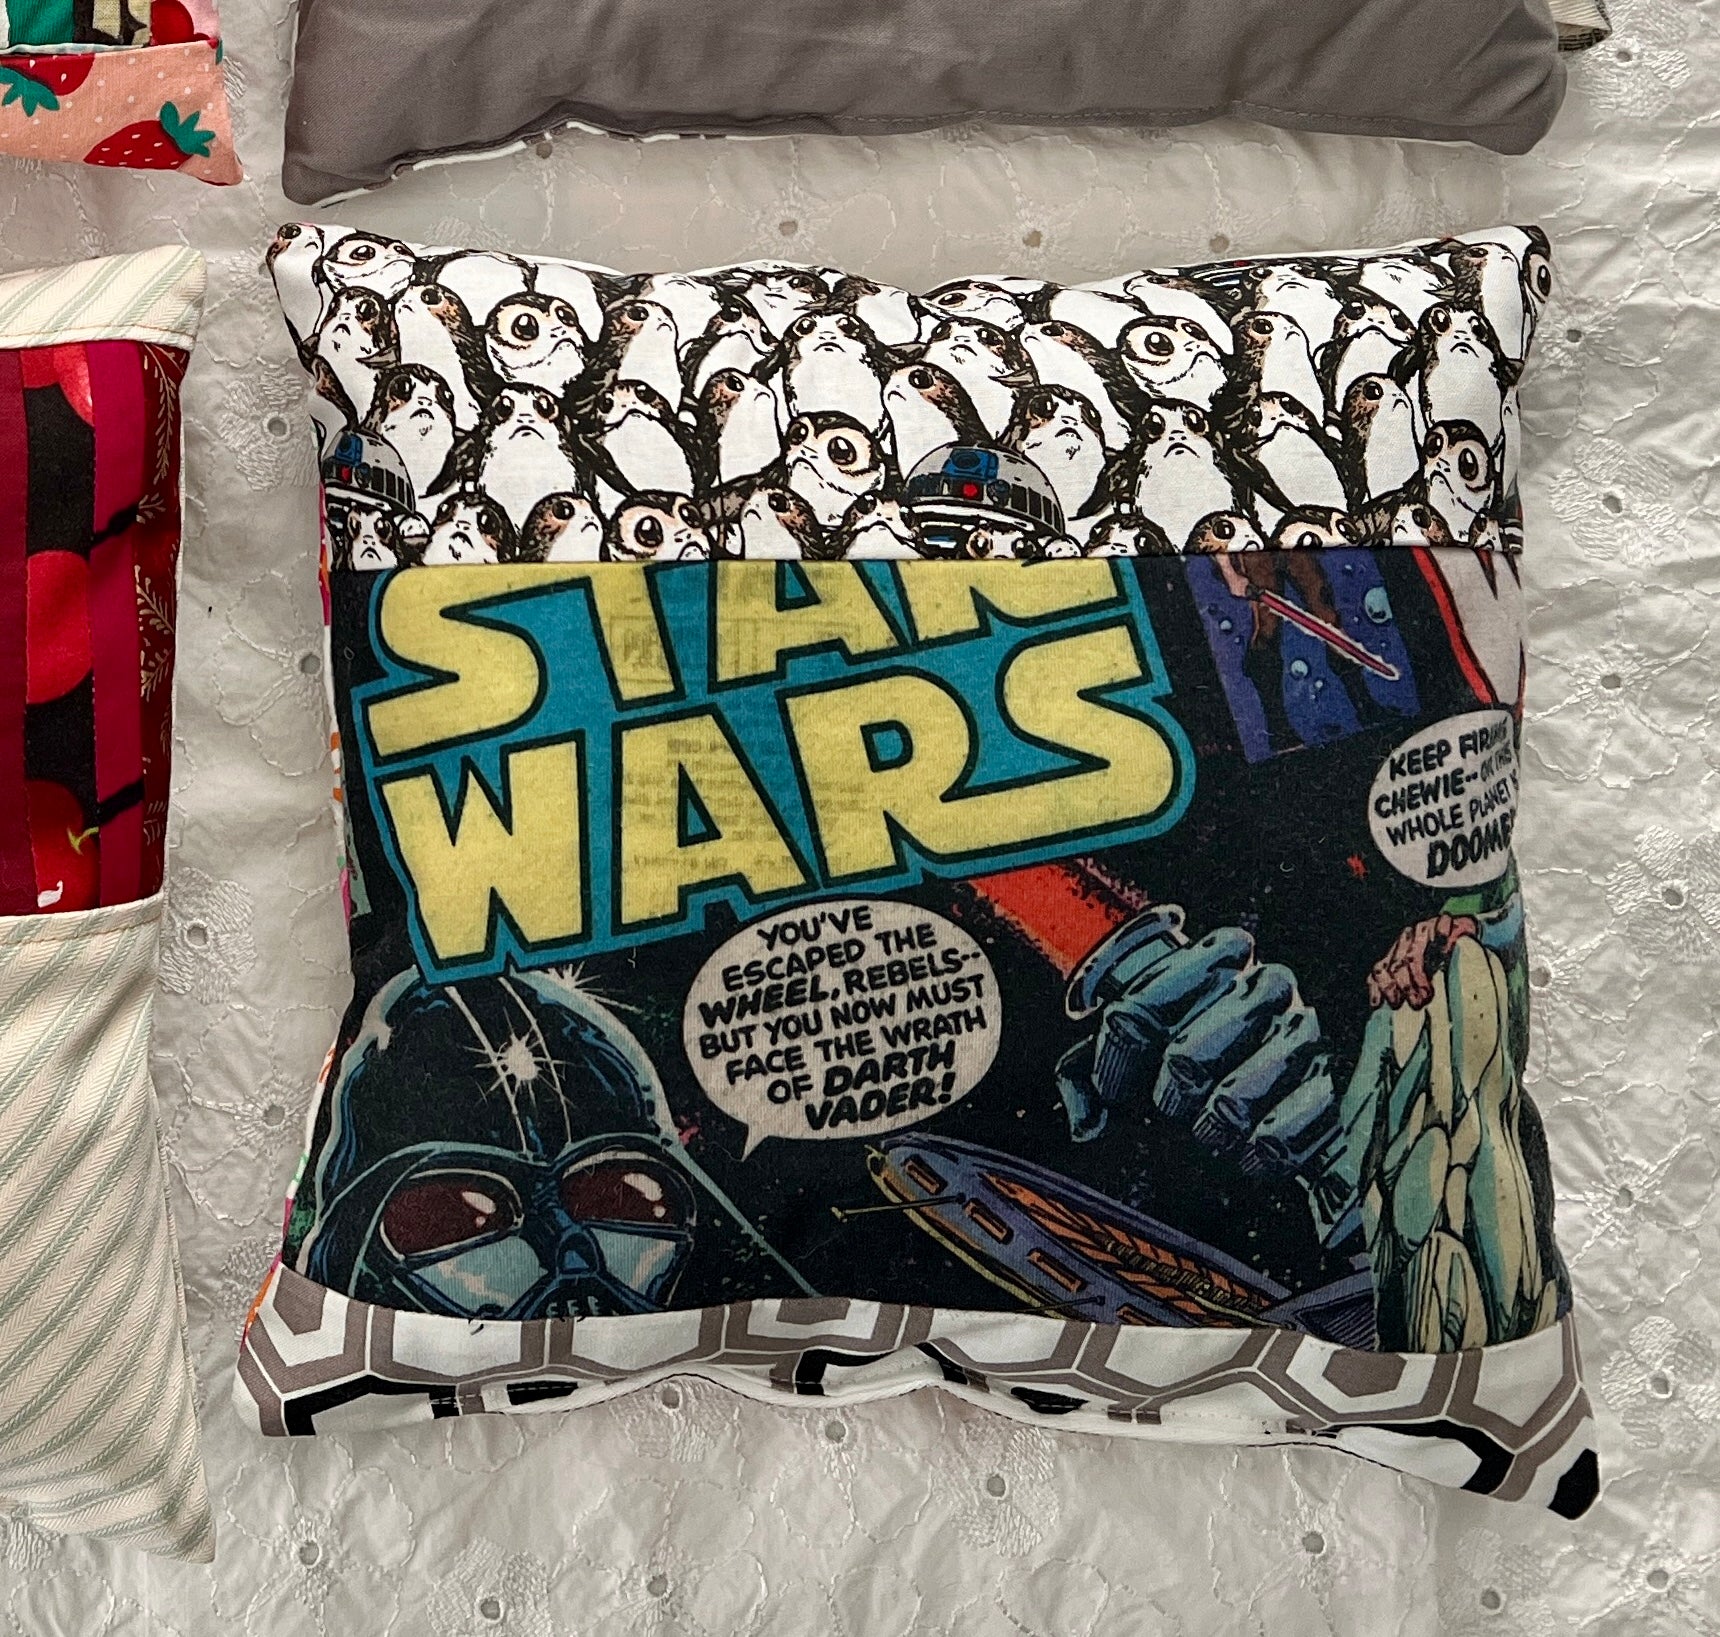 a little tooth fairy pillow featuring a colorful star wars comic book design